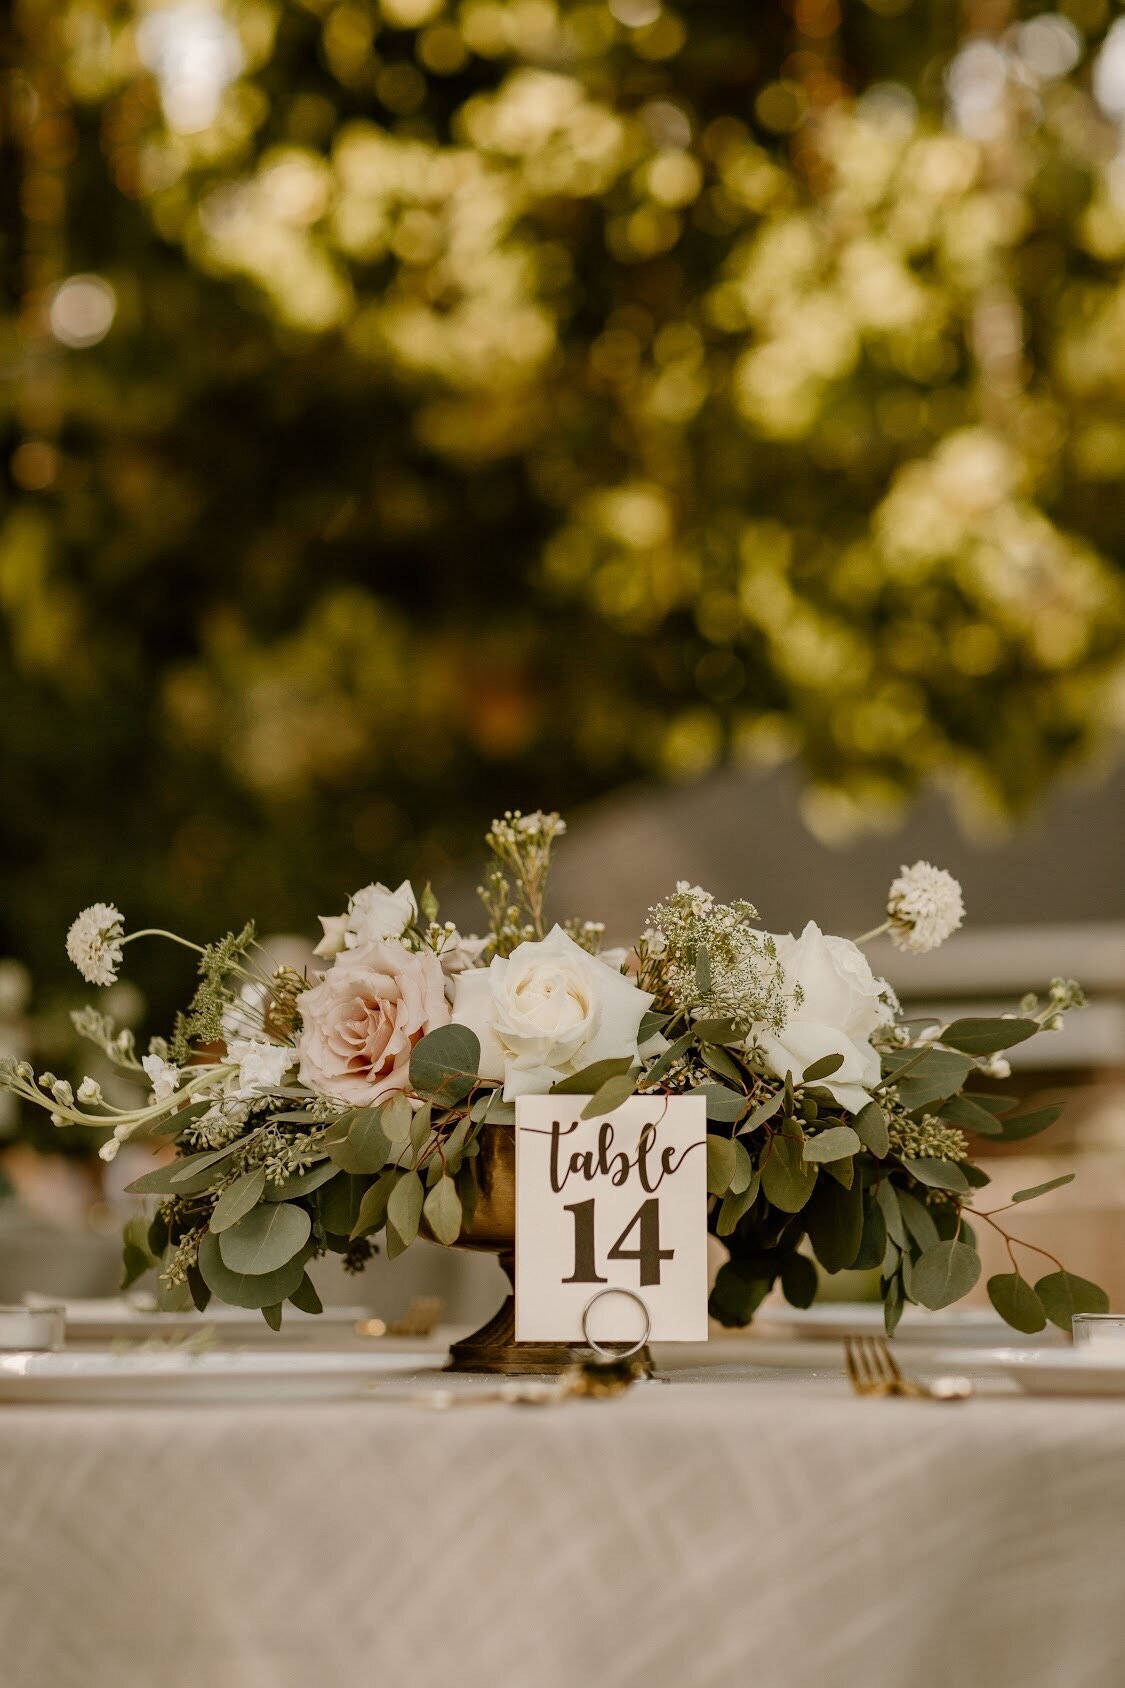 Blush and white roses with seeded and silver dollar eucalyptus is a perfect centerpiece.